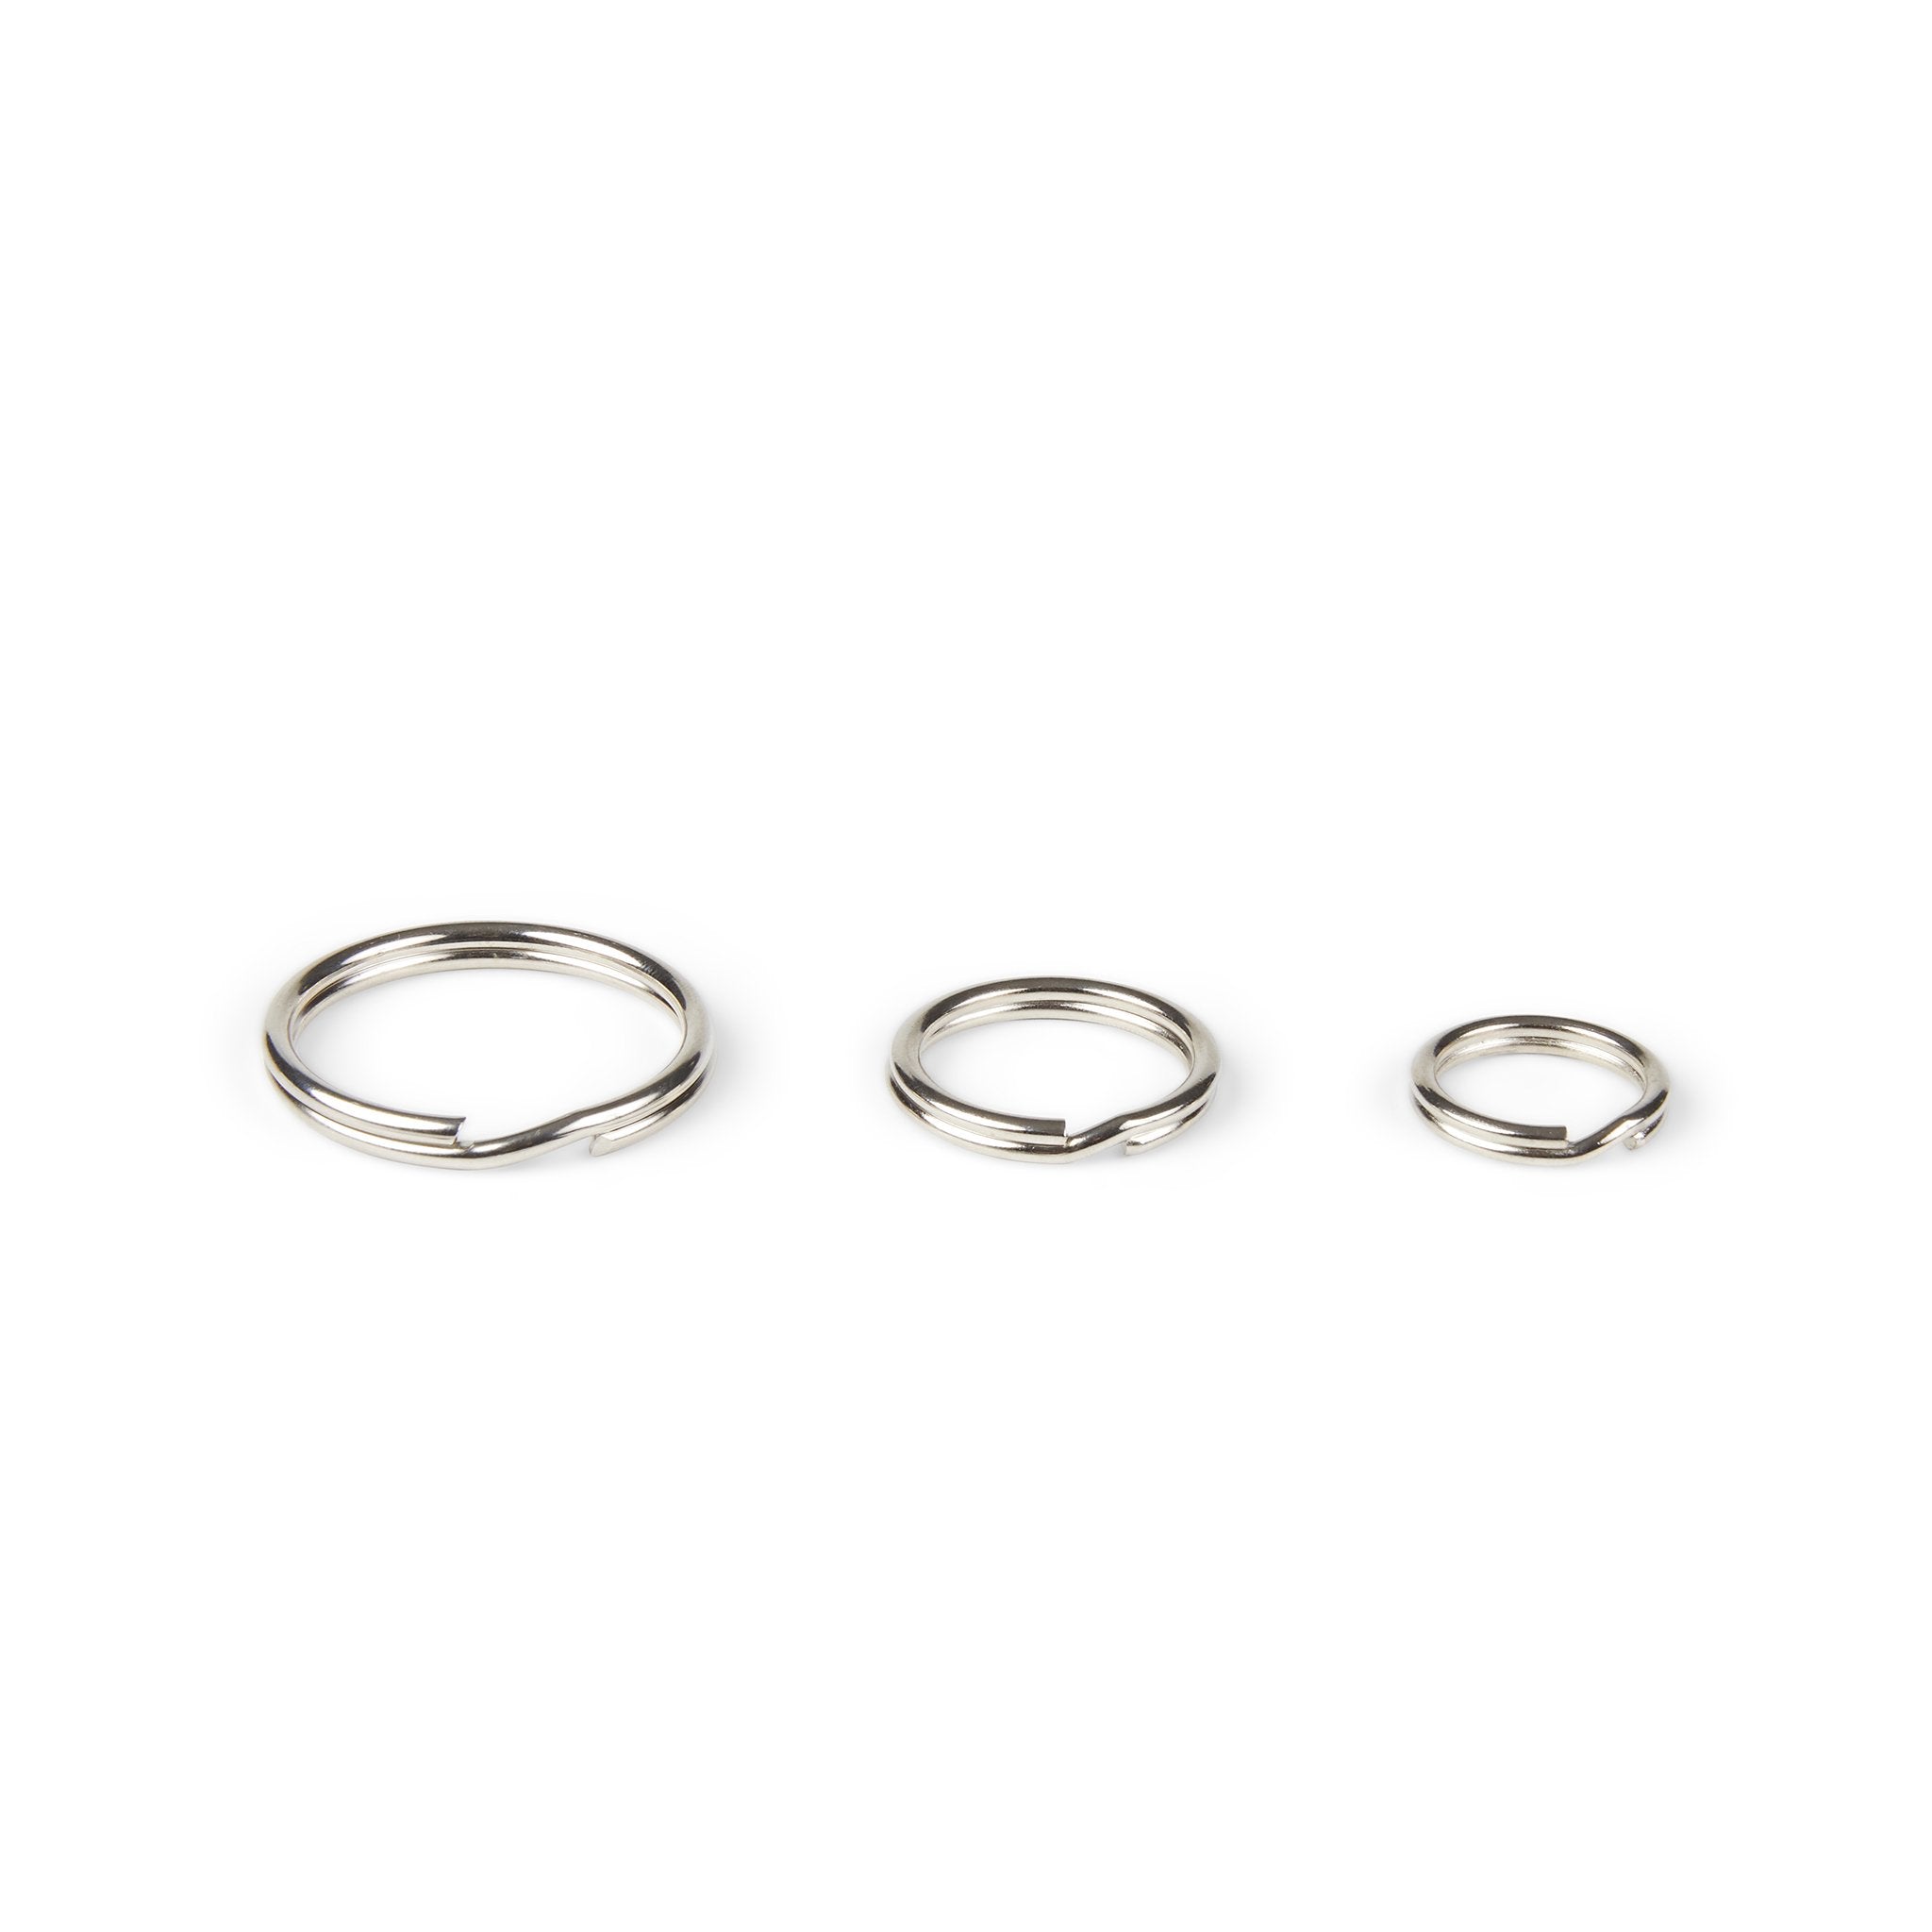 Tool Ring - 19mm (10 Pack)